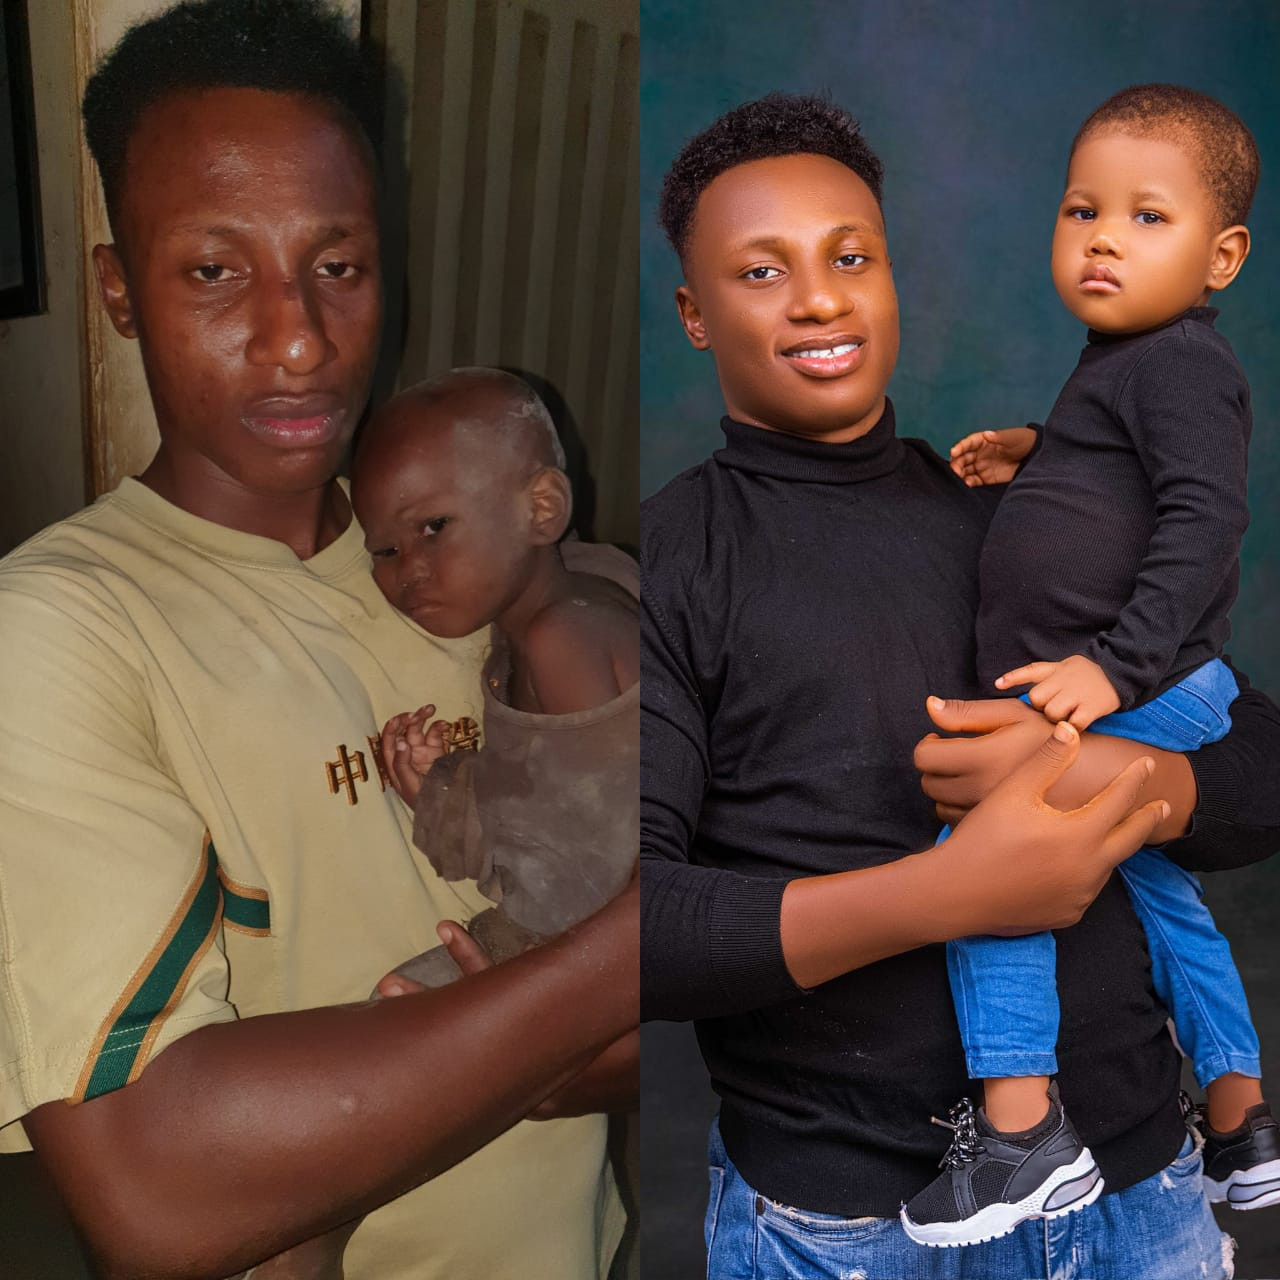 YOUNG MAN WHO FOUND A BABY GIRL DUMPED BY THE ROAD SIDE IN ENUGU IN JUNE 2022, SHARES NEW HEARTWARMING PHOTO OF HIM AND THE GIRL